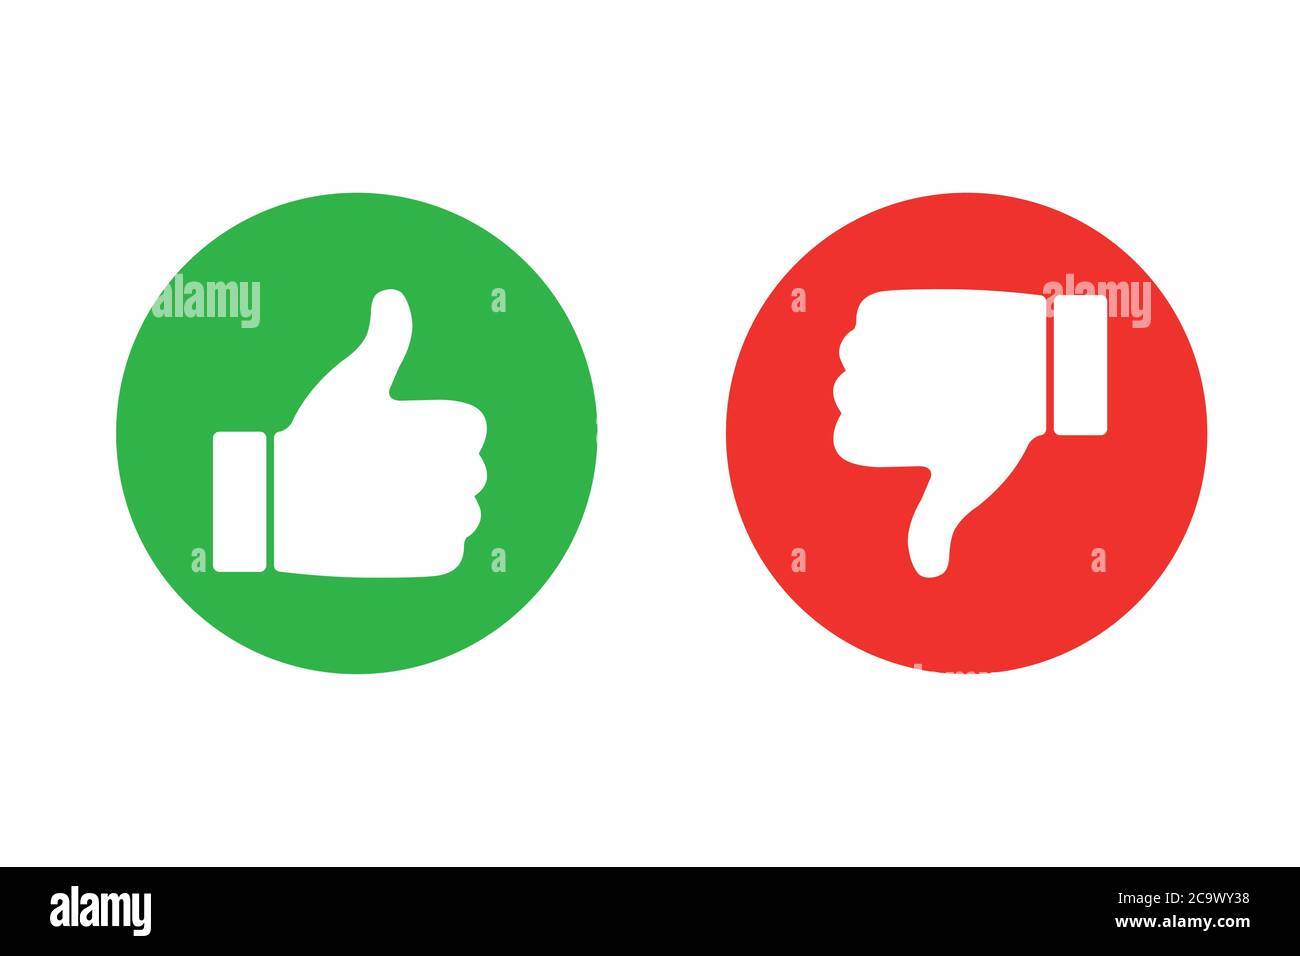 Thumbs up and thumb down icon set. Thumb up and thumb down line icons. Flat style - stock vector. Stock Vector